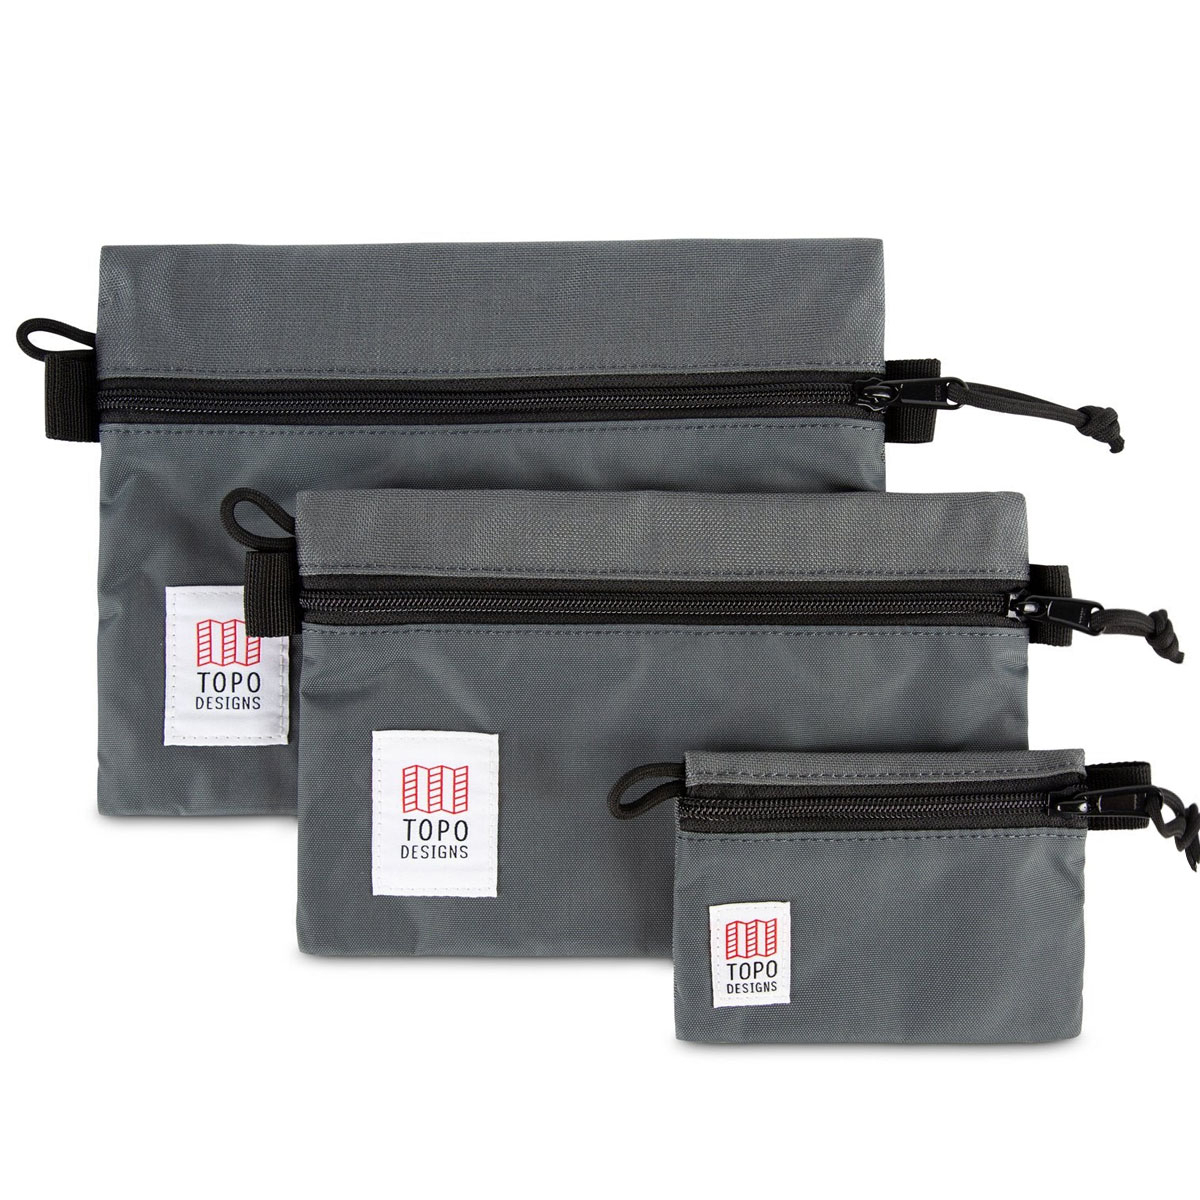 Topo Designs Accessory Bags 3 Pack Charcoal 